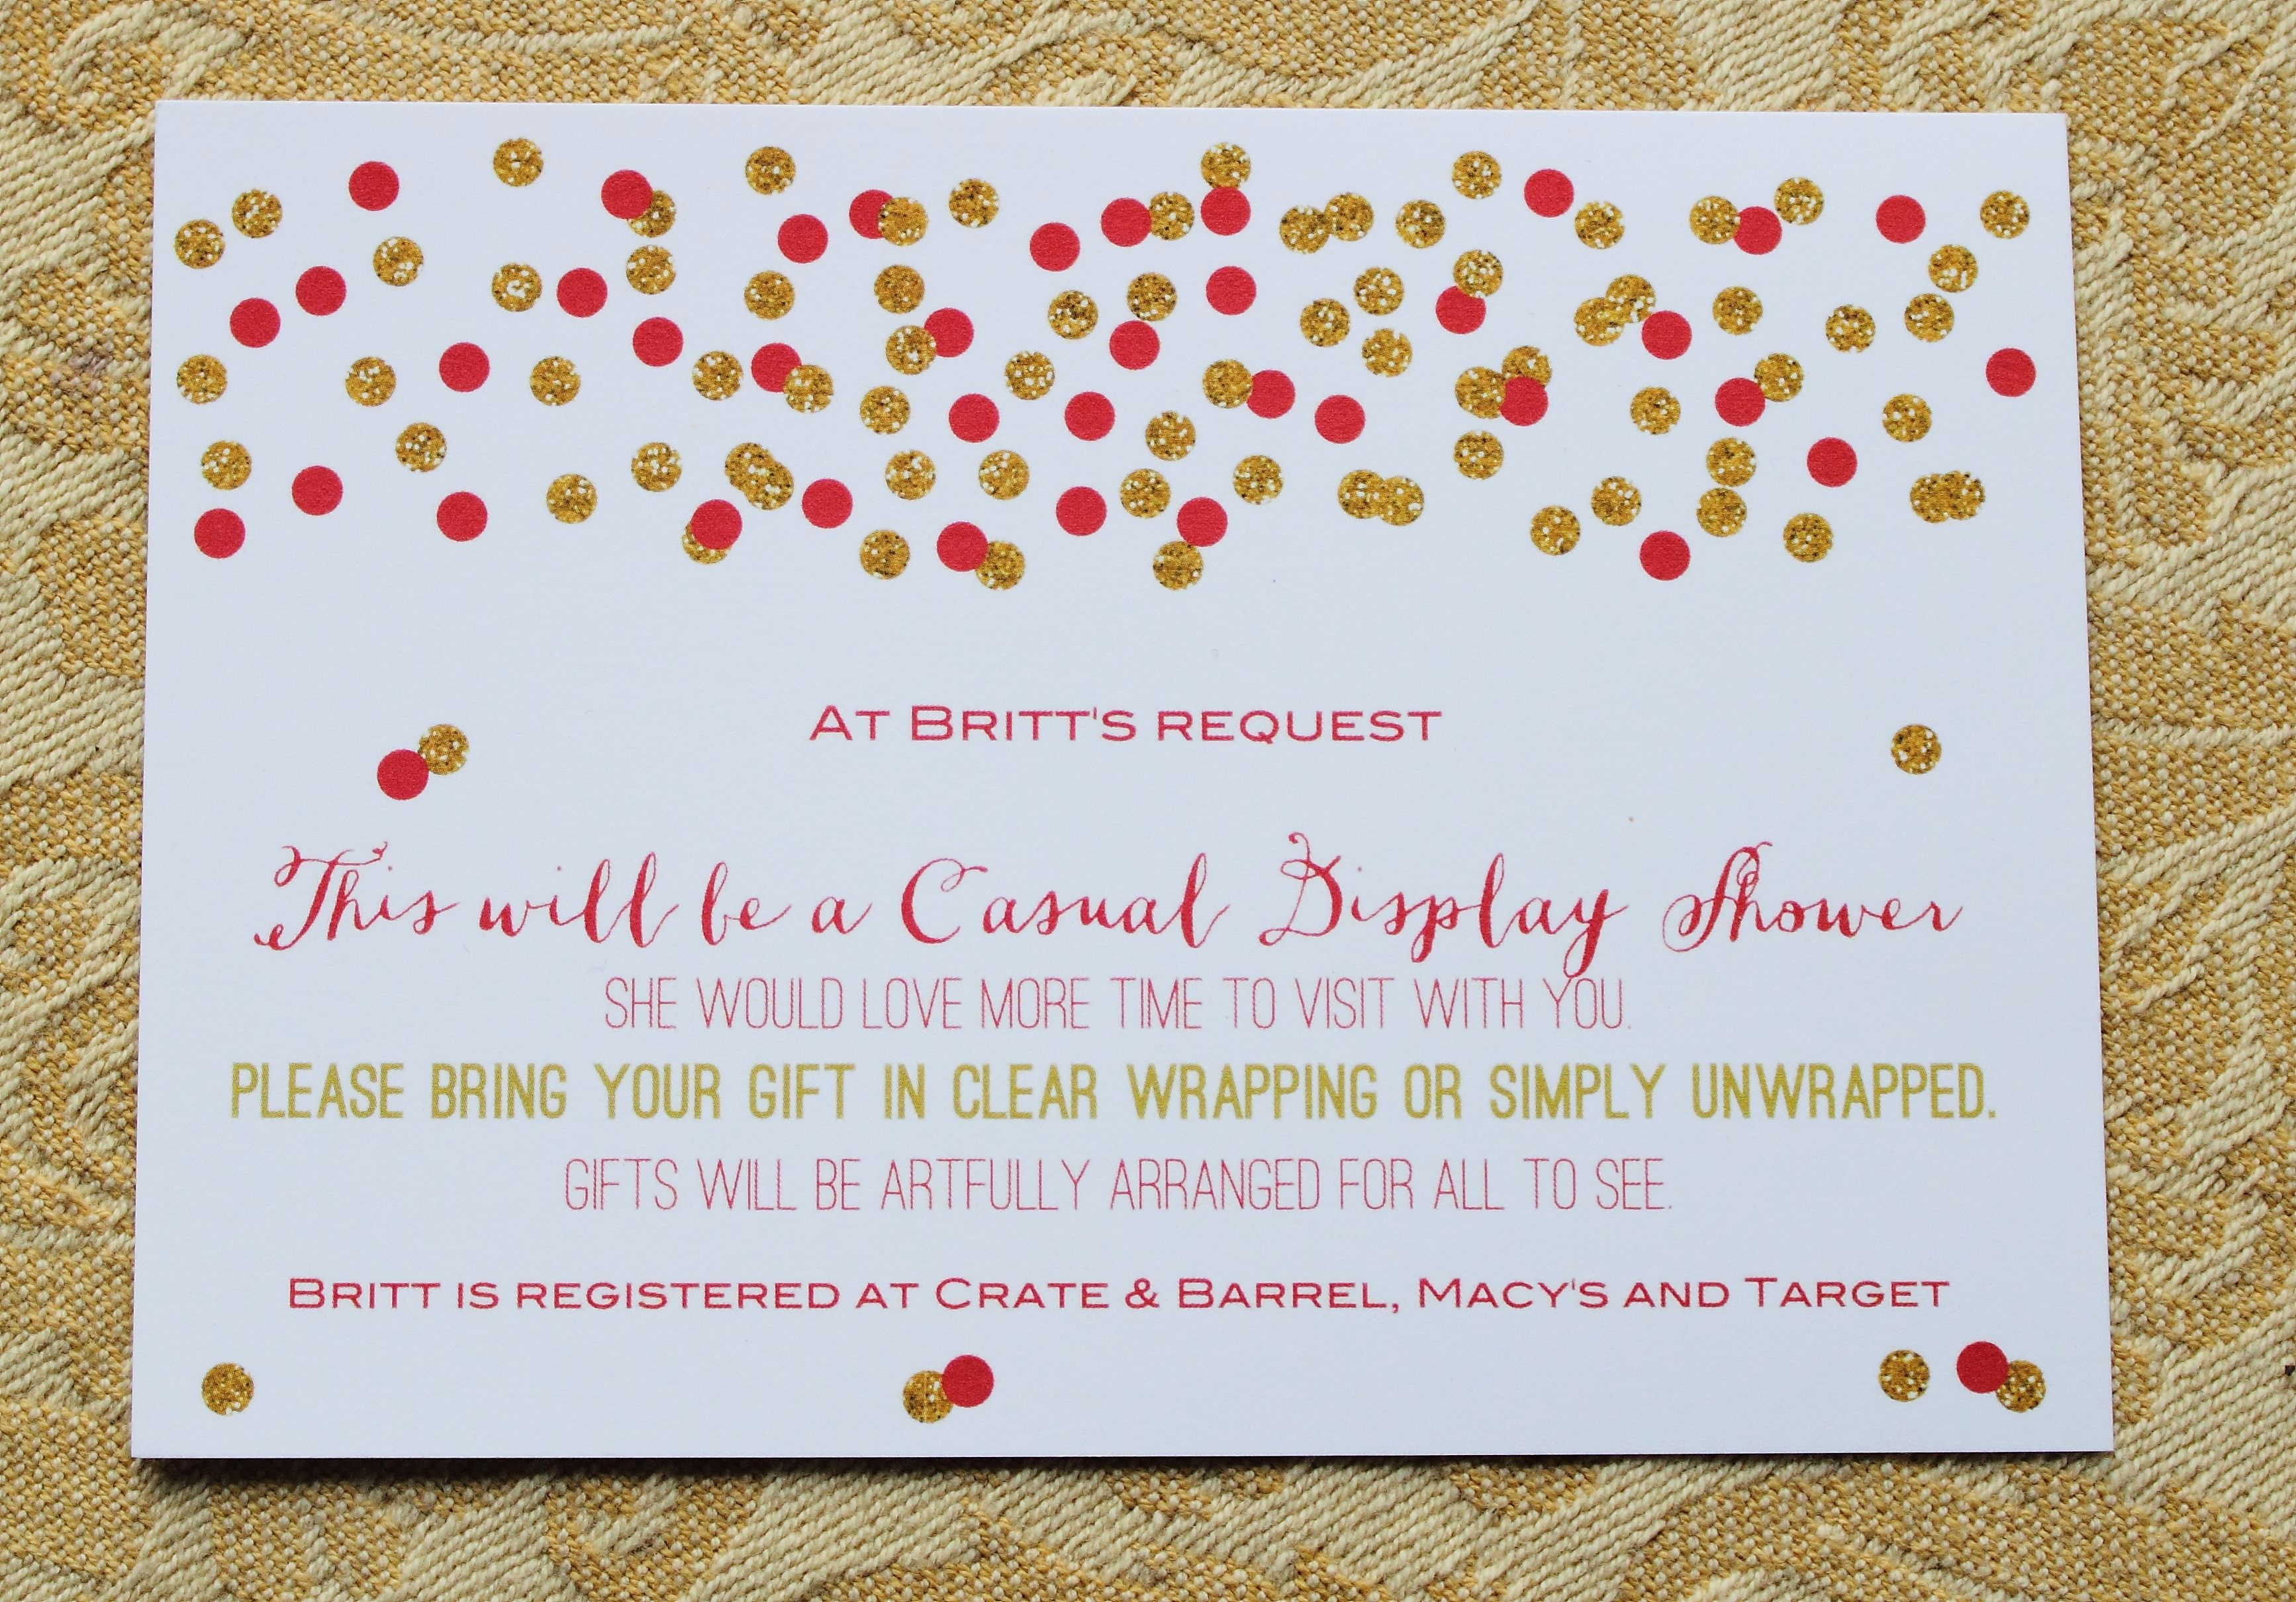 Display Baby Shower Invitation Wording Lovely Pin by Cindy Carrigan On Shower Wedding Ideas In 2019